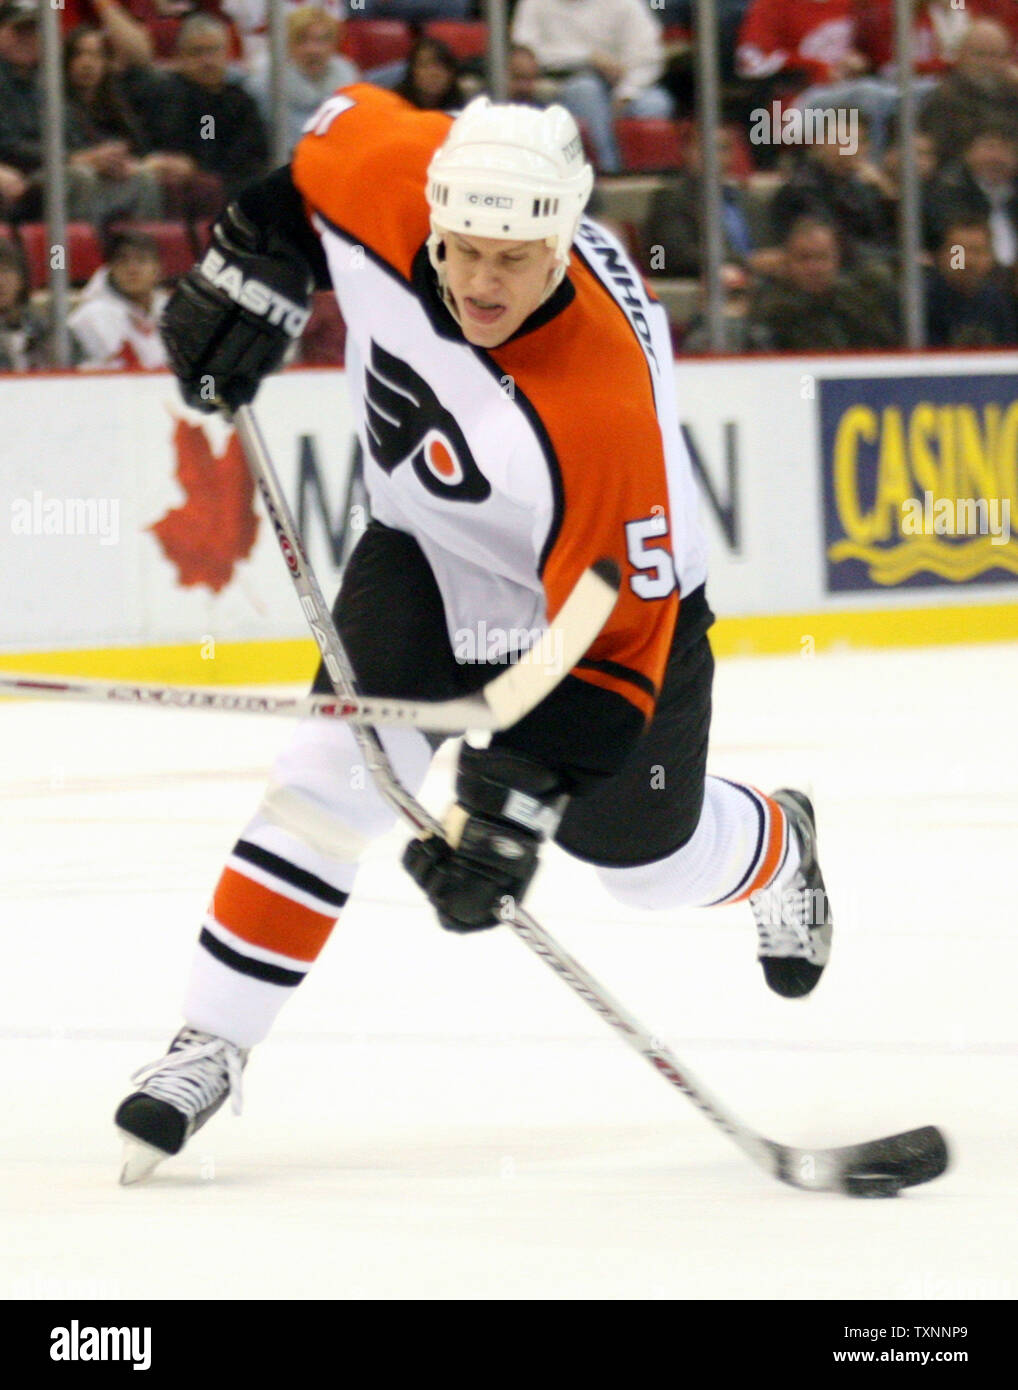 Philadelphia Flyers defenseman Kim Johnsson (5) breaks his stick on a slapshot in the first period against the Detroit Red Wings at Joe Louis Arena in Detroit, MI on January 12, 2006.  (UPI Photo/Scott R. Galvin) Stock Photo